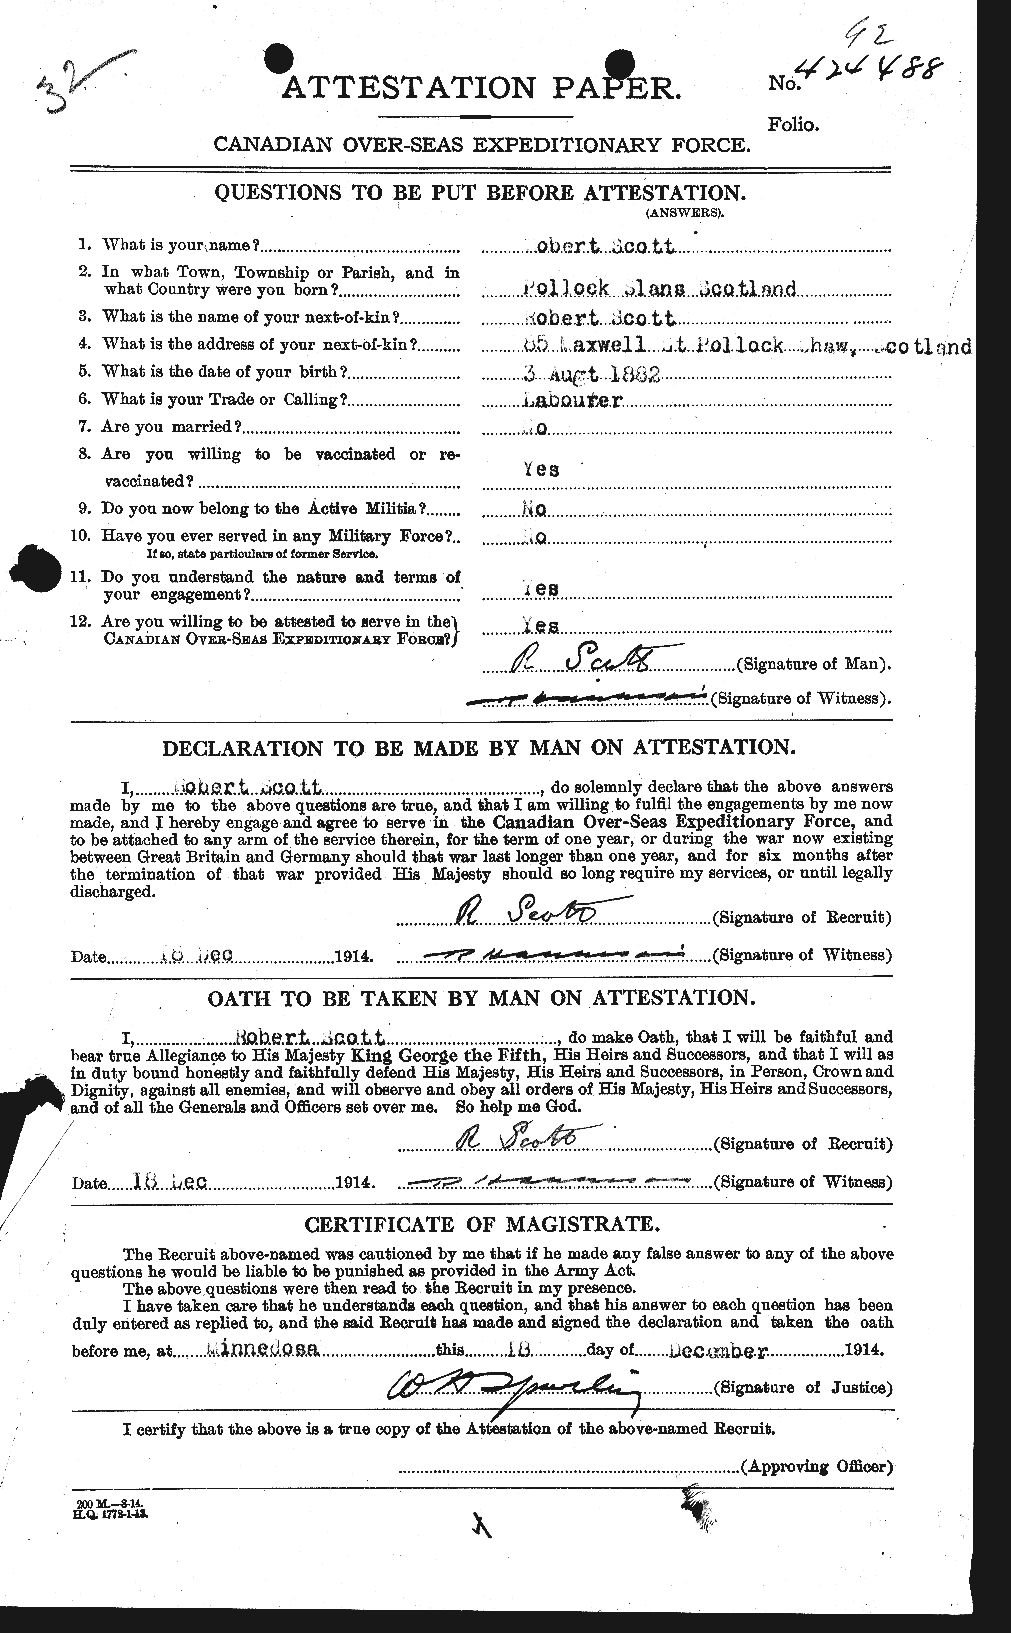 Personnel Records of the First World War - CEF 089220a